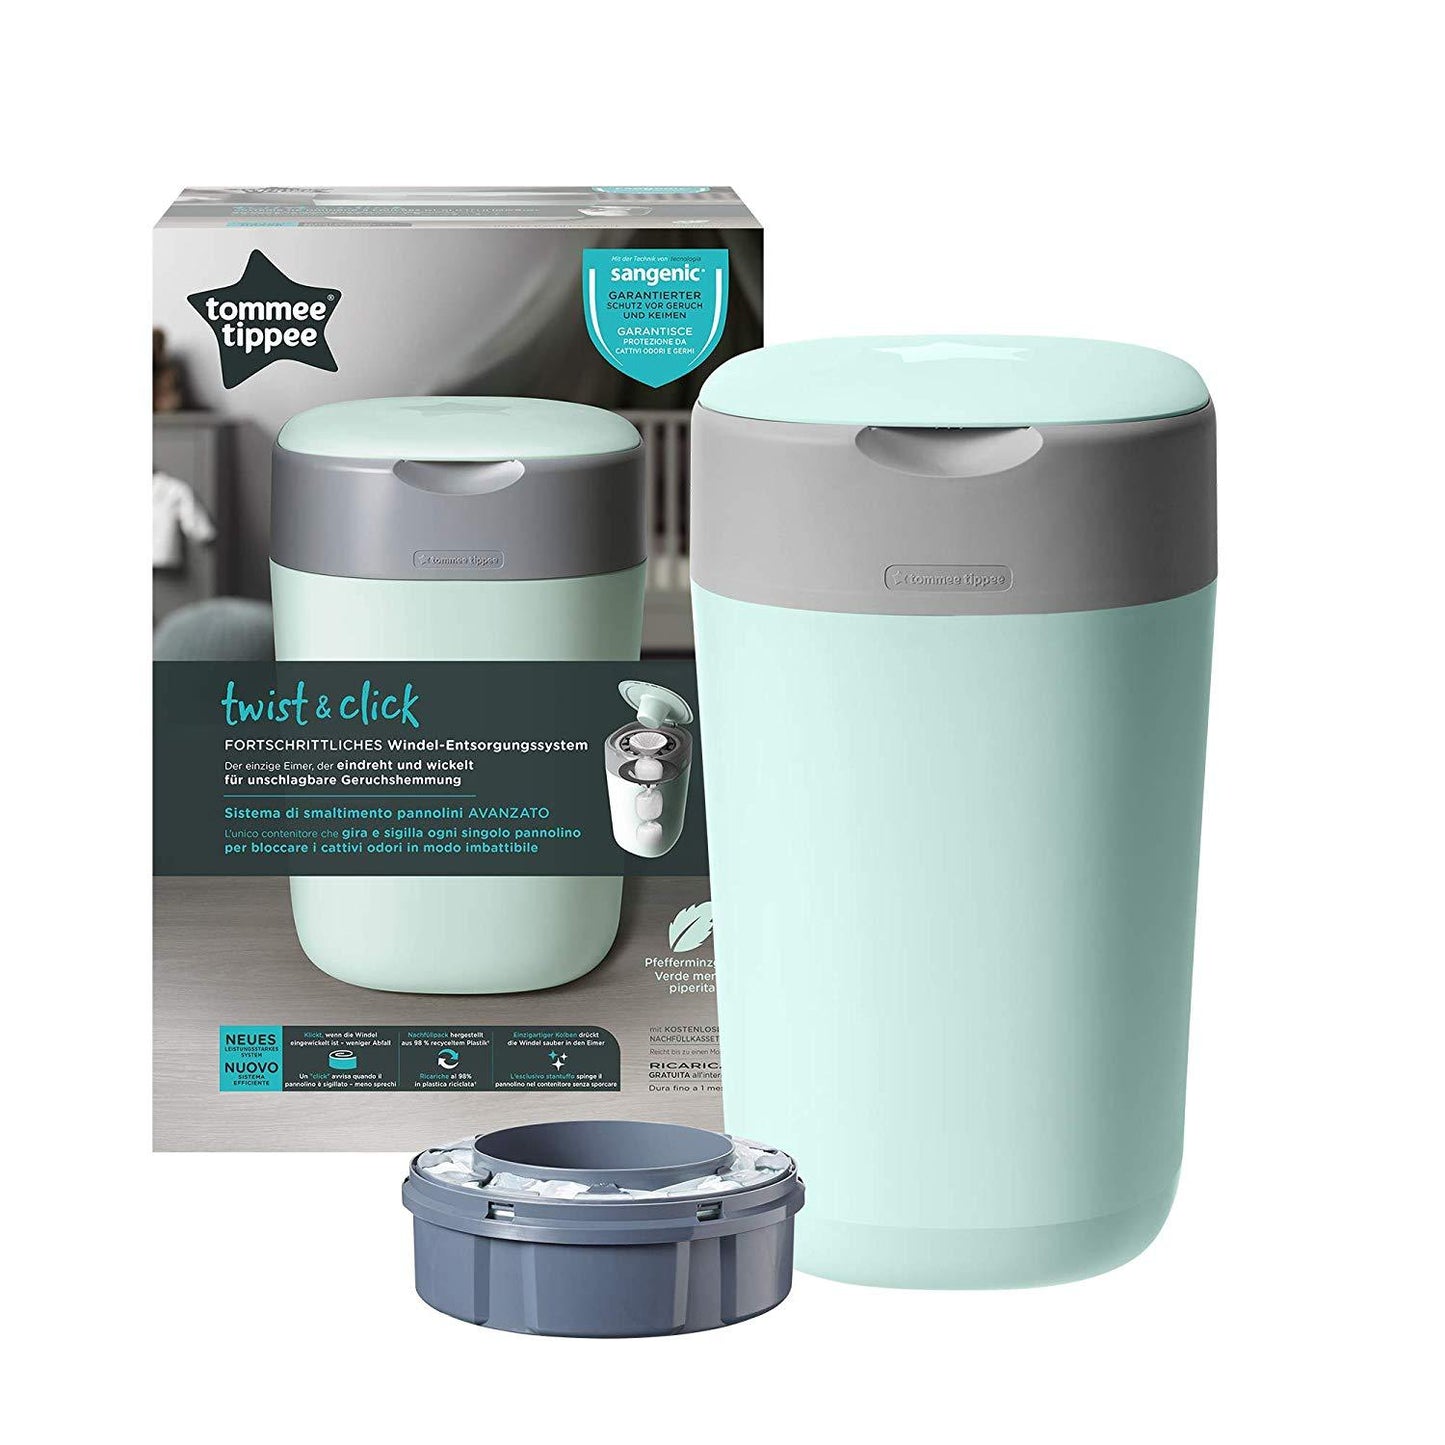 Tommee Tippee Sangenic Lixeira Elimina Odores e Germes Bestseller Anne Claire Baby Store Ltd. NOVO! Twist and Click Verde 